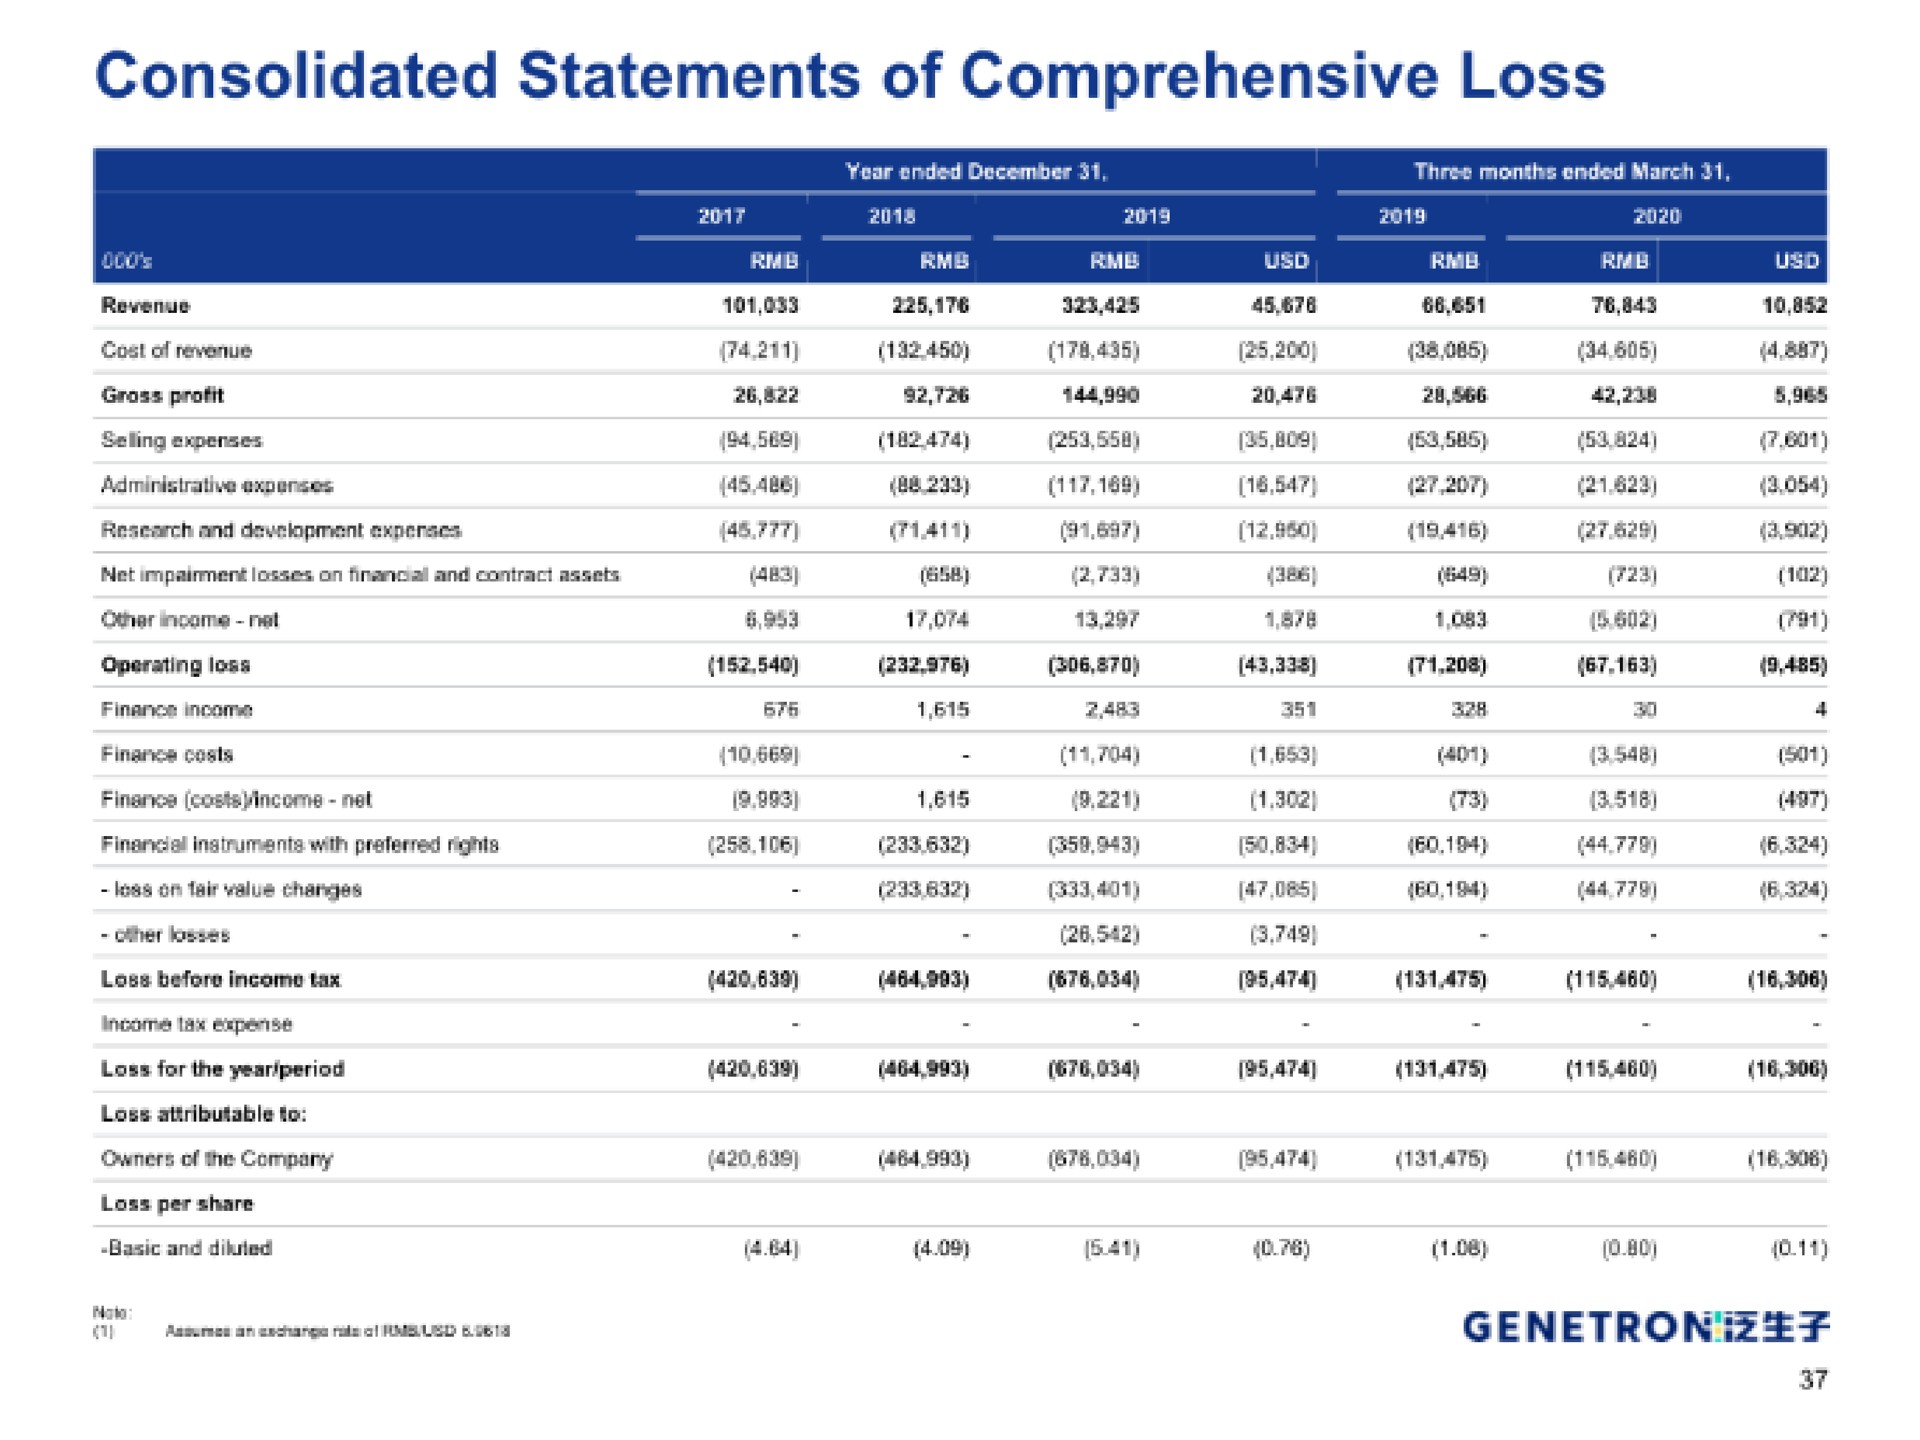 consolidated statements of comprehensive loss | Genetron